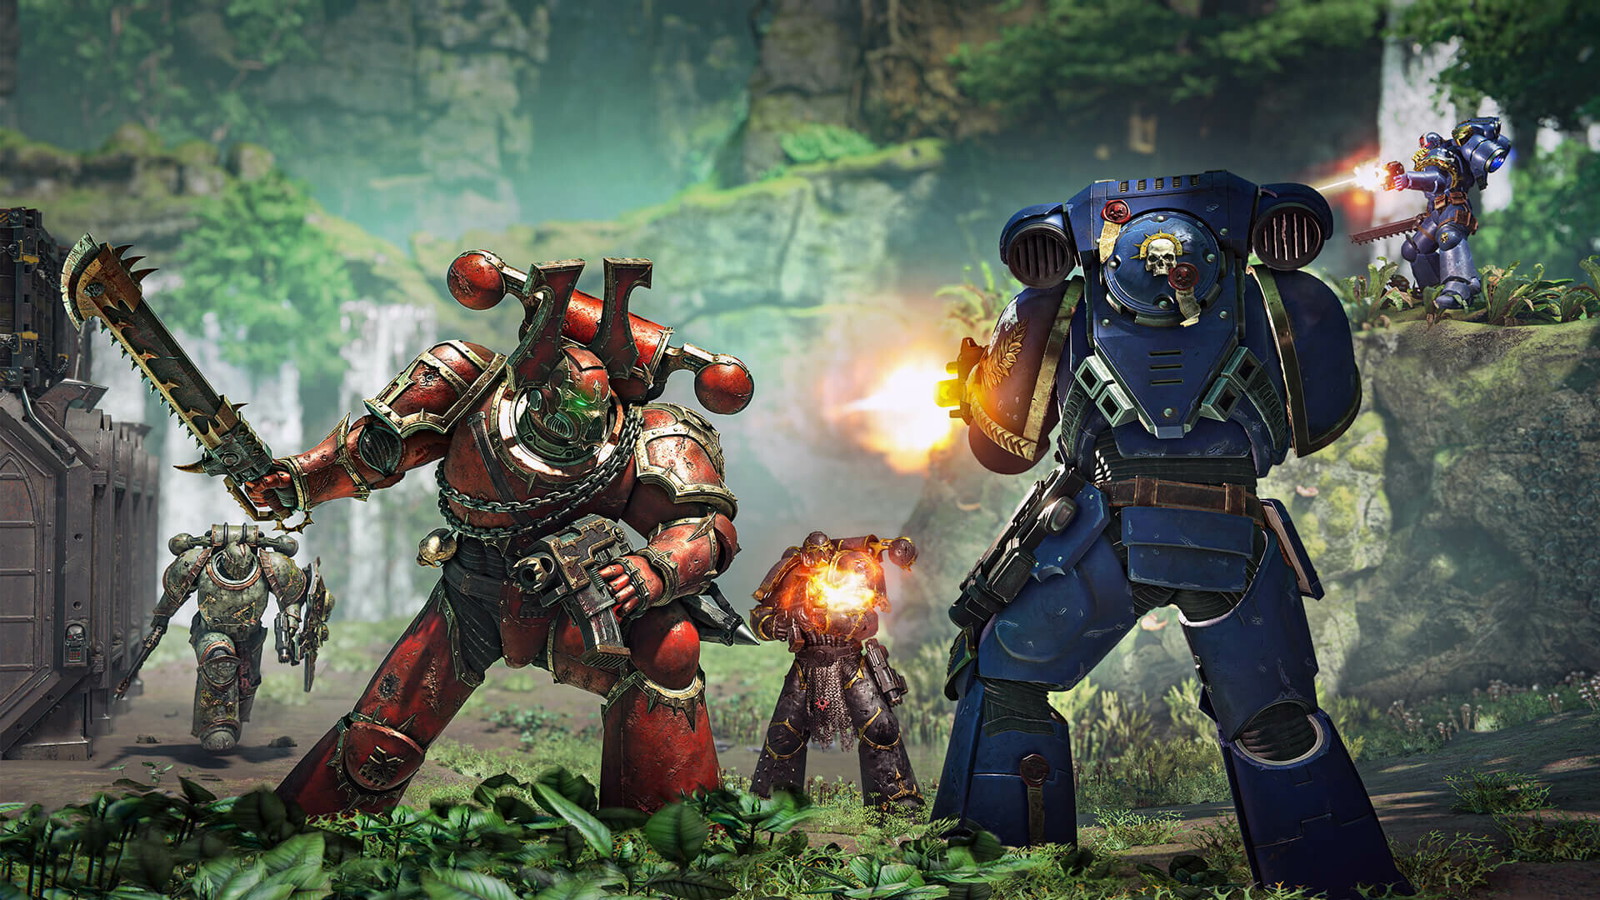 Under two months to launch for Space Marine 2. Credit: Saber Interactive